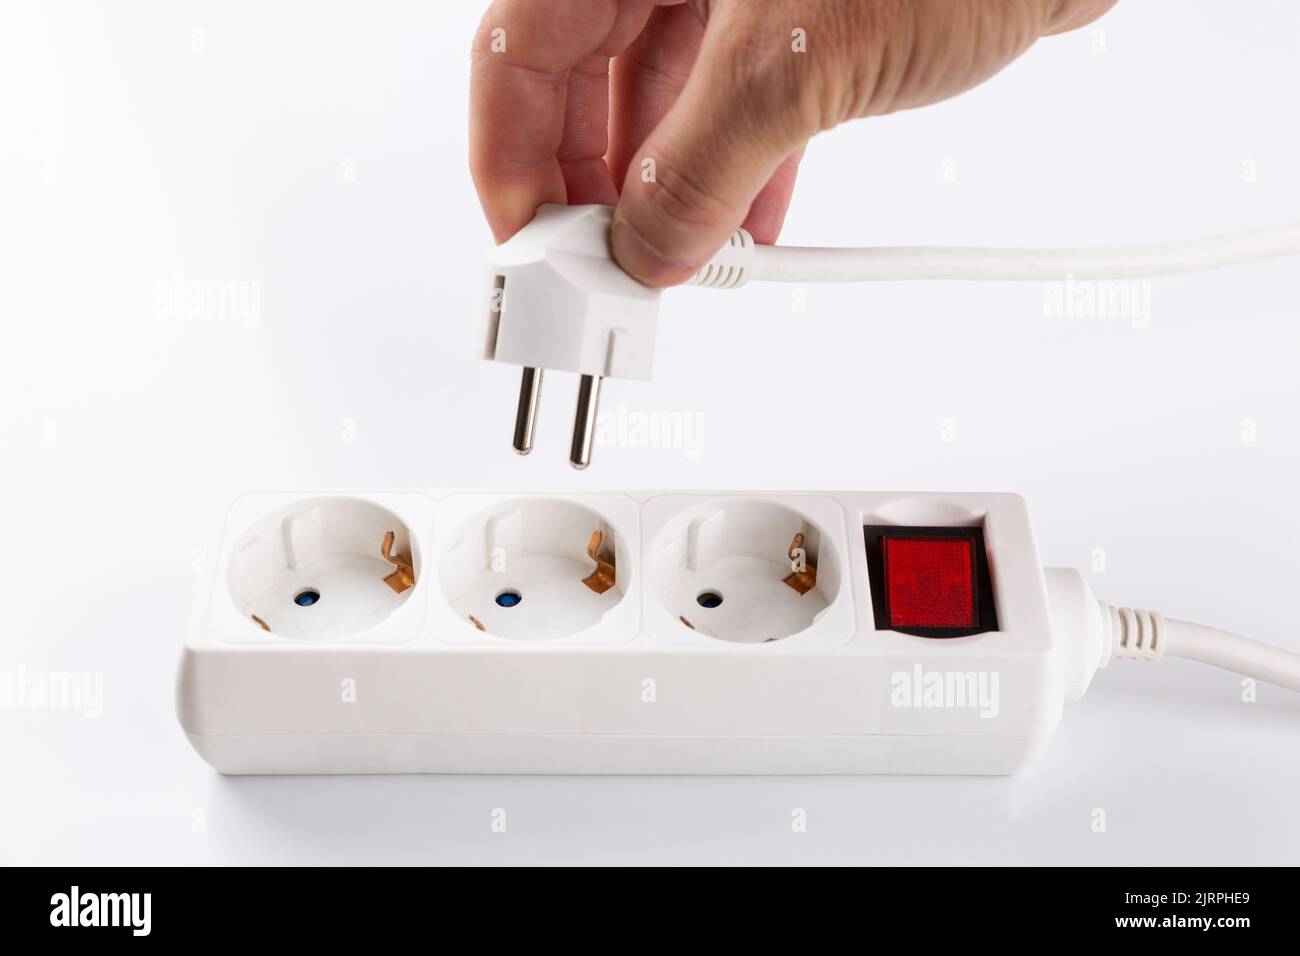 anonymous hand connects a plug to the mains. Electricity efficiency and rising energy costs Stock Photo